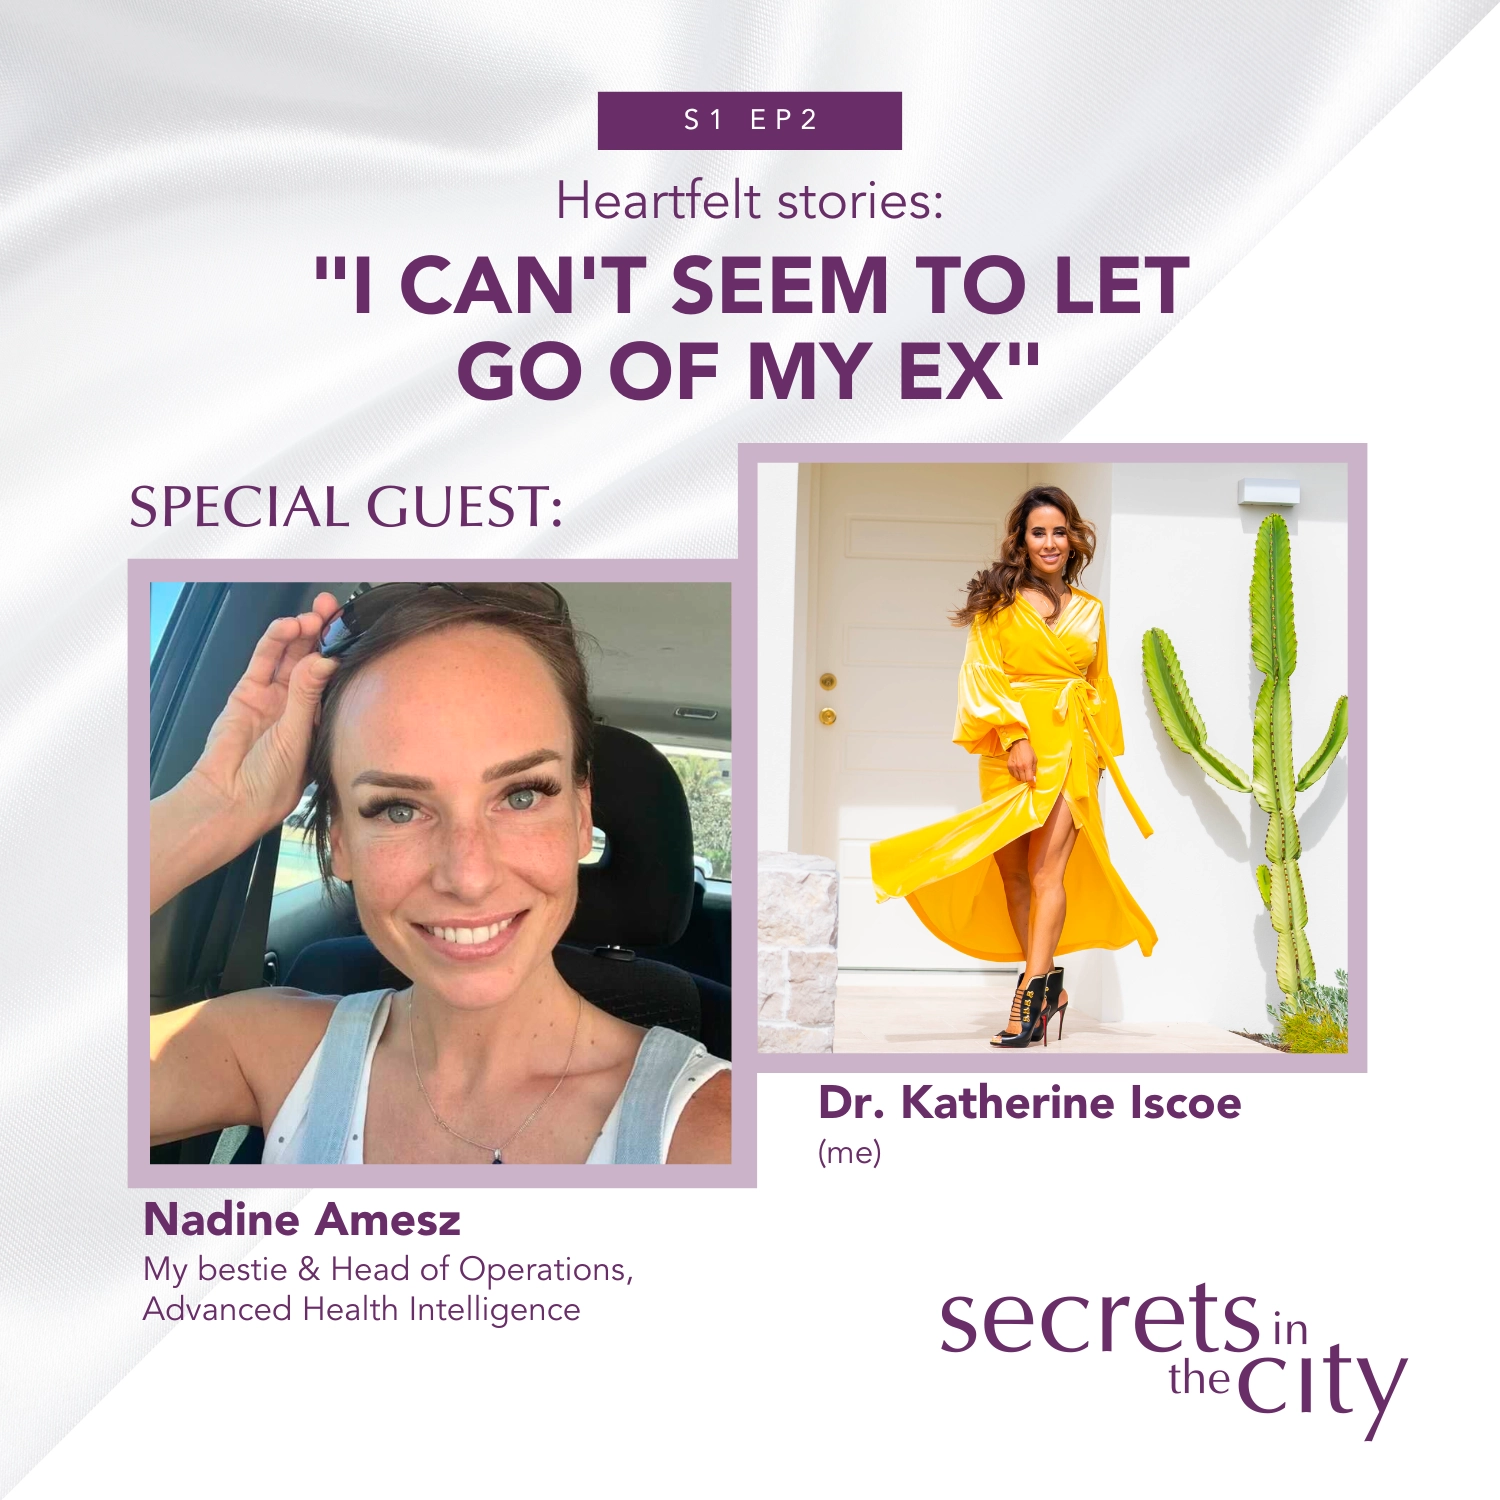 Secrets in the City podcast cover featuring photos of Nadine Amesz and Dr. Katherine Iscoe